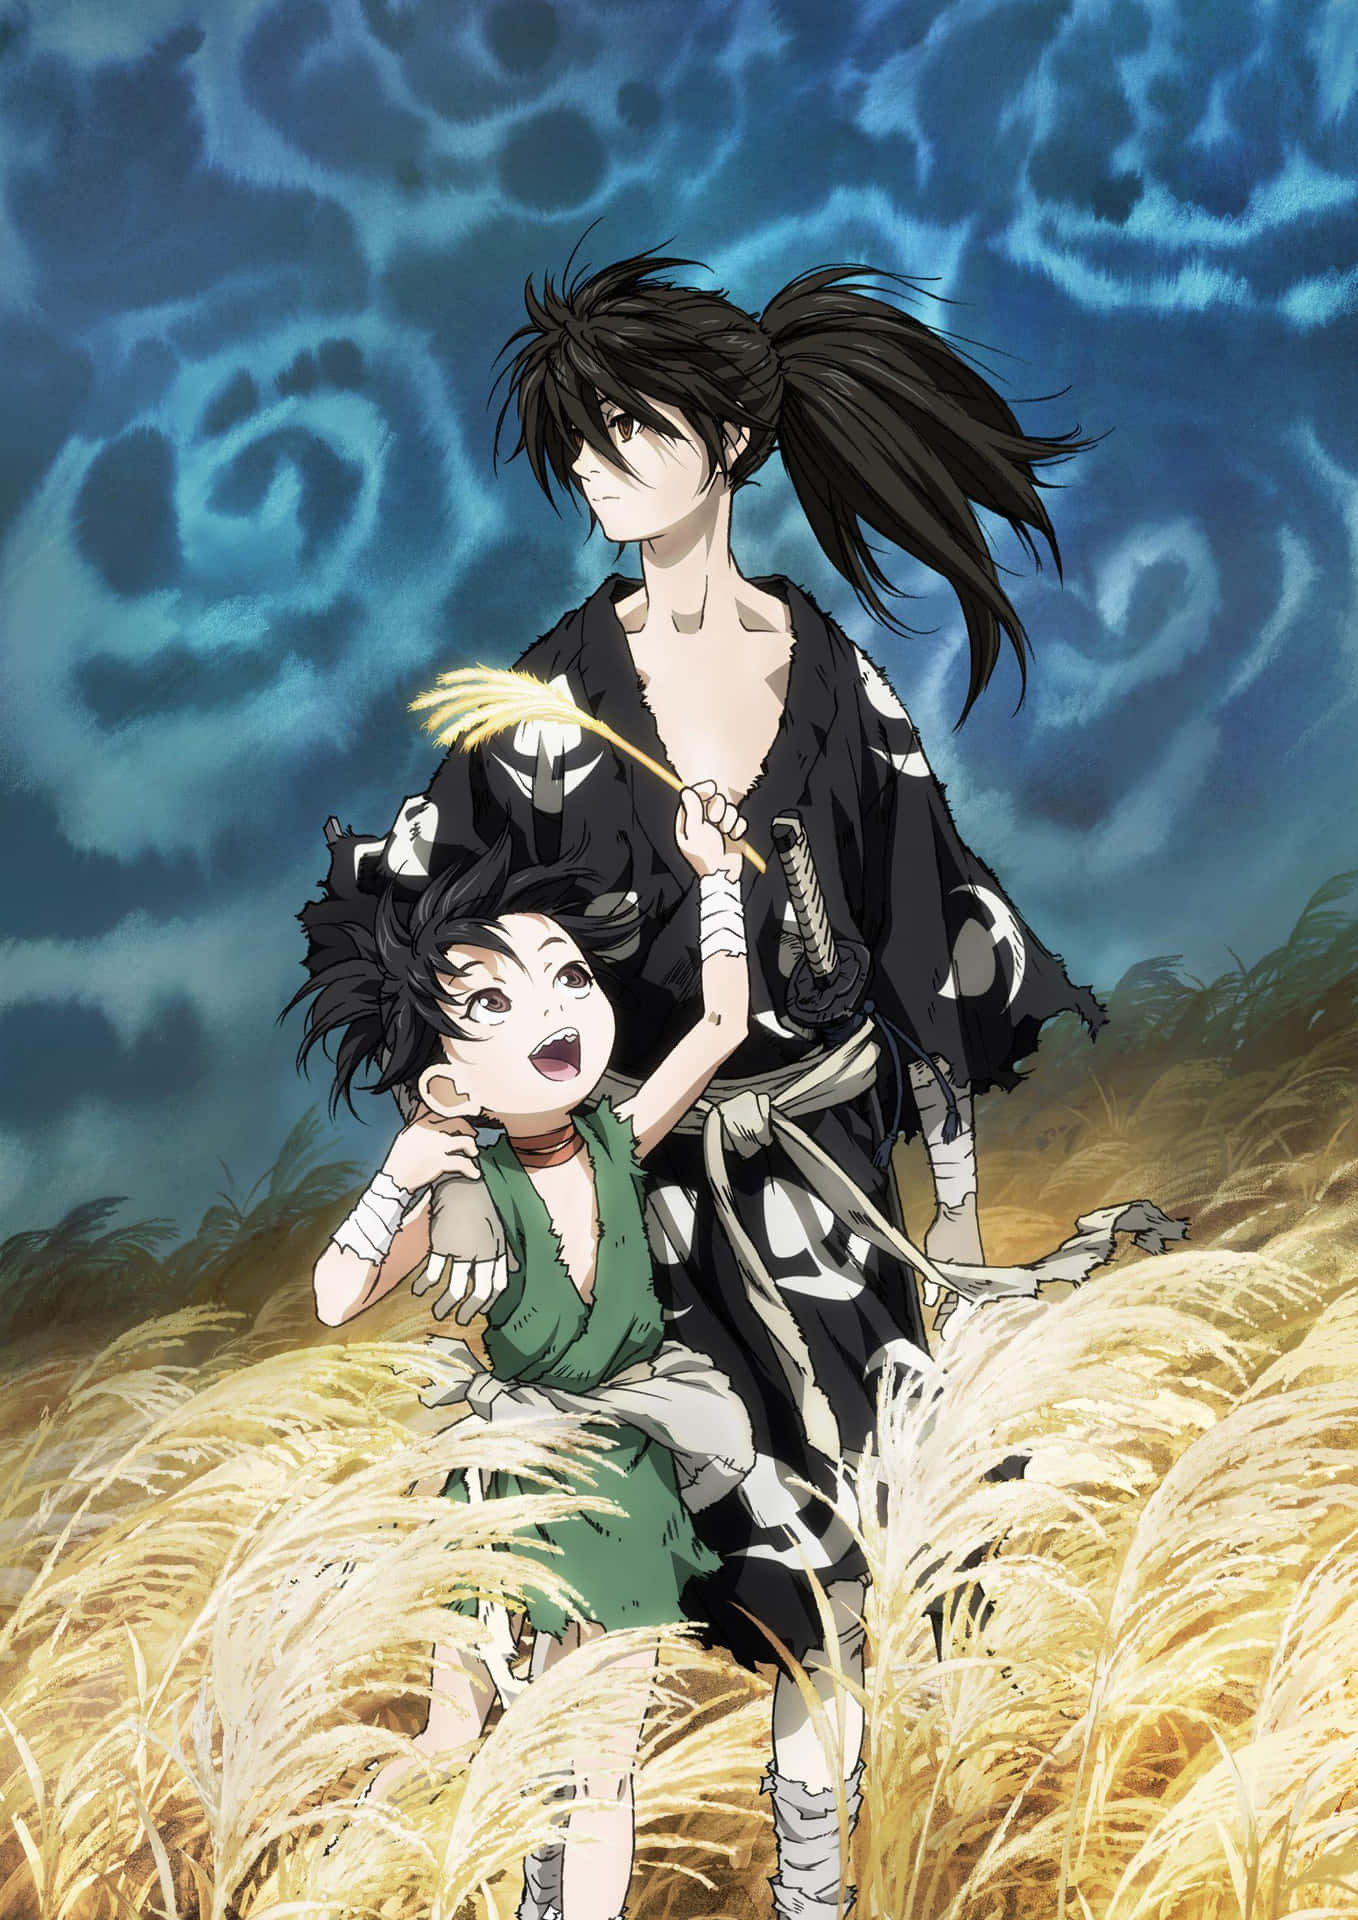 Cutting Through: Hyakkimaru fights a horde of demons to get closer to his goals in Dororo.